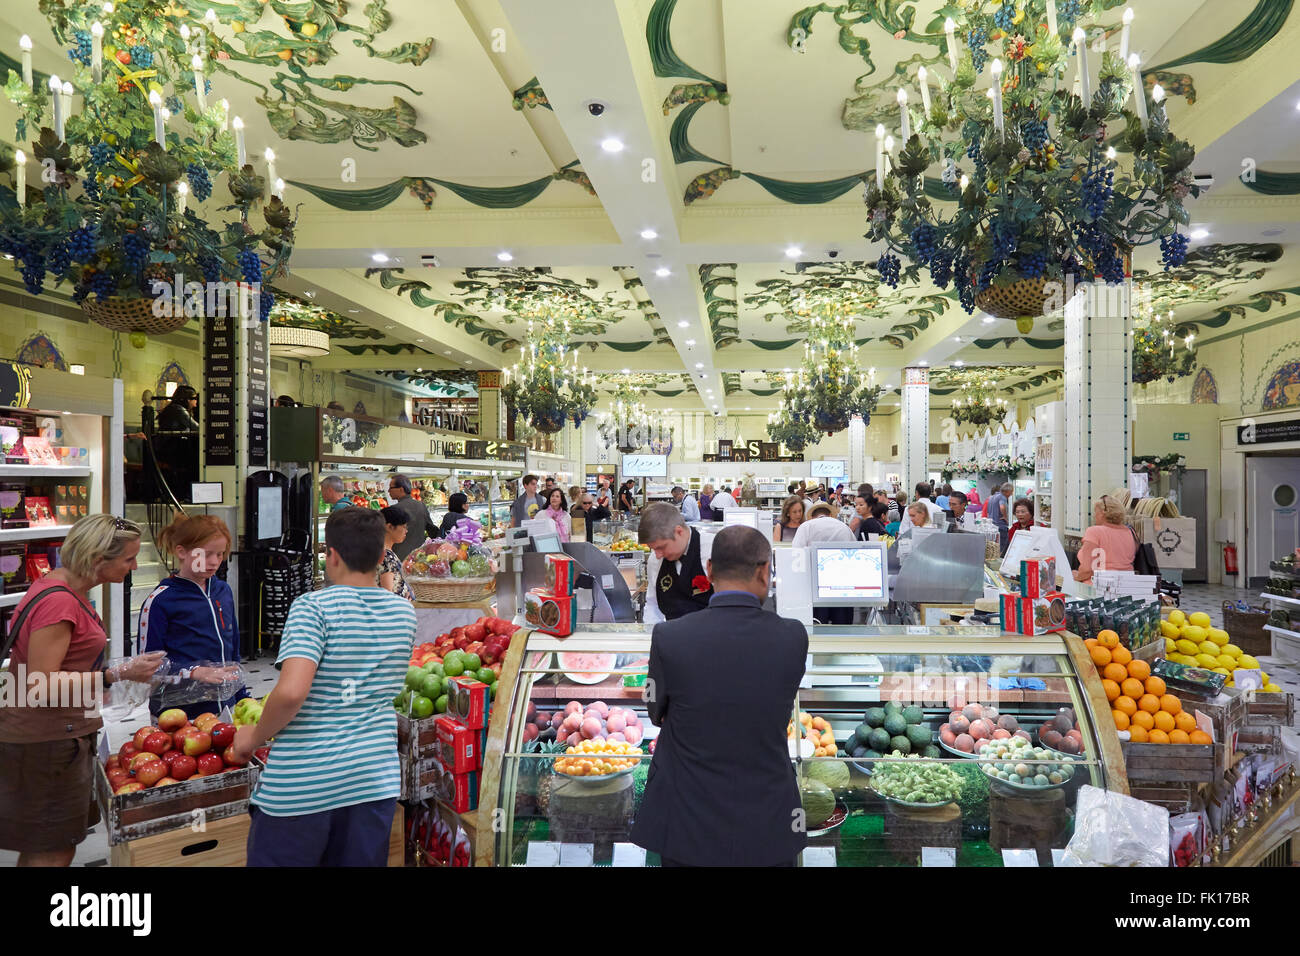 Harrods department store interior, grocery area with people in London Stock Photo